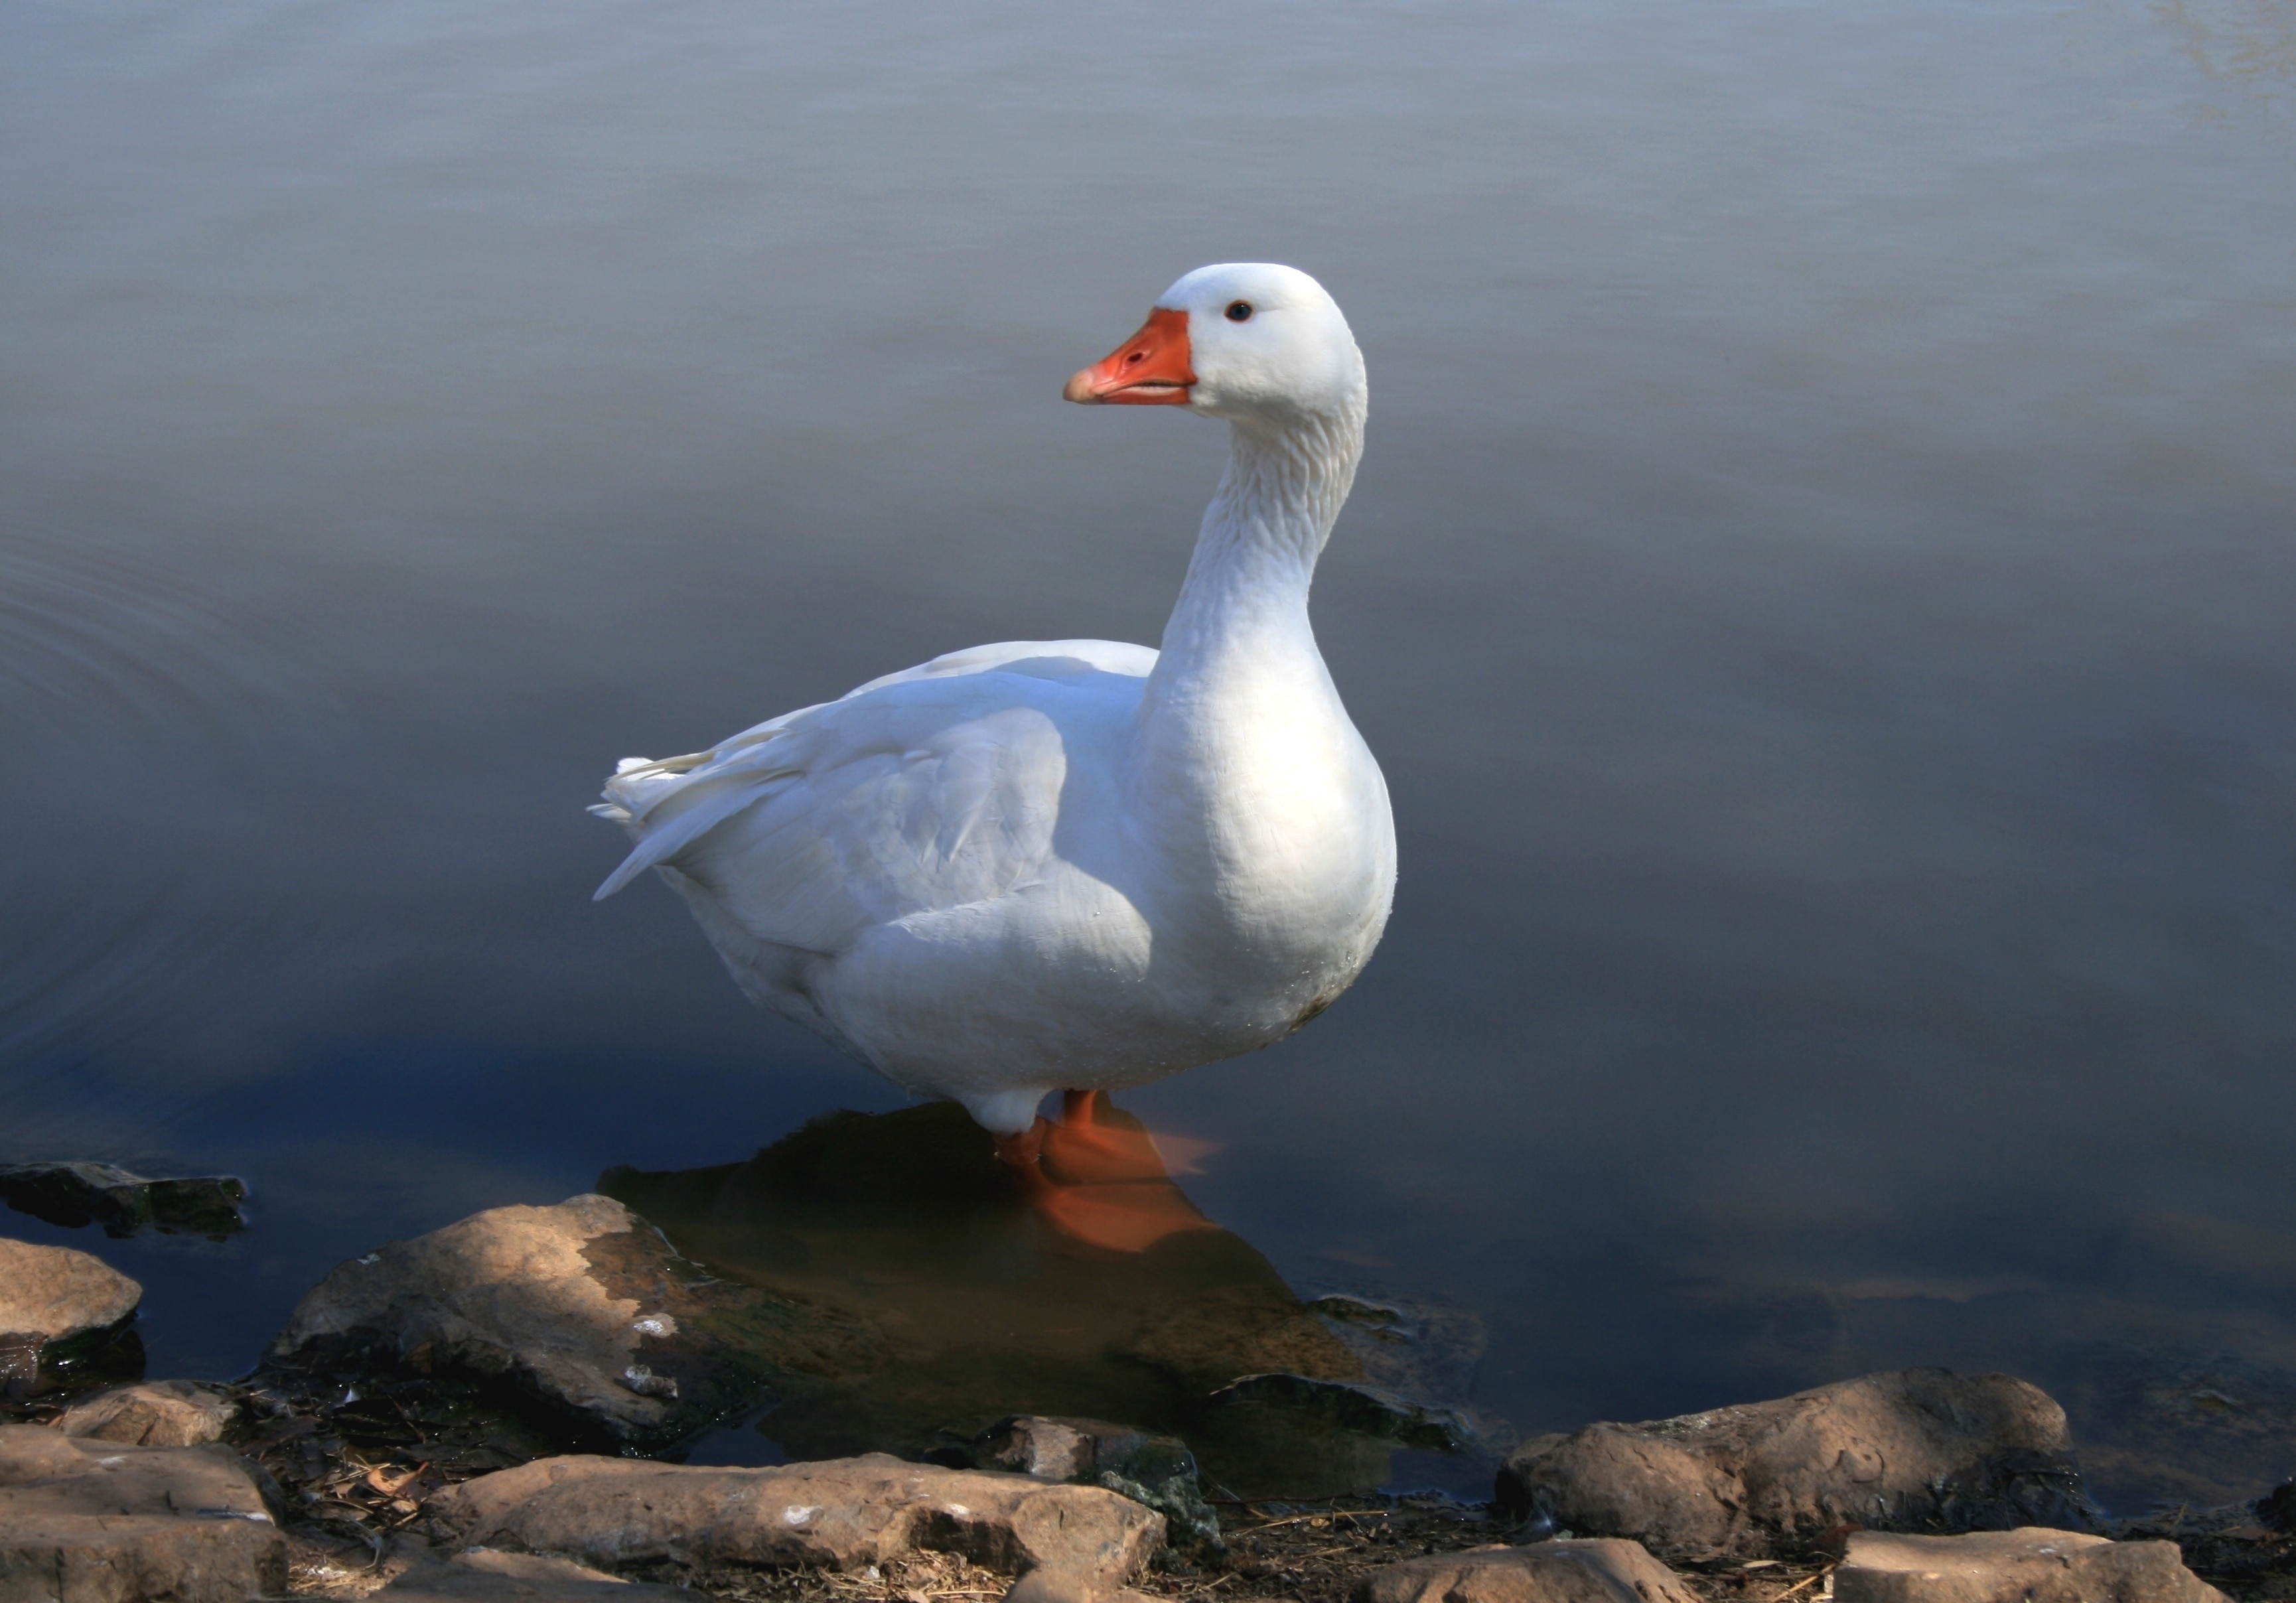 goose standing on rock formation on body of water